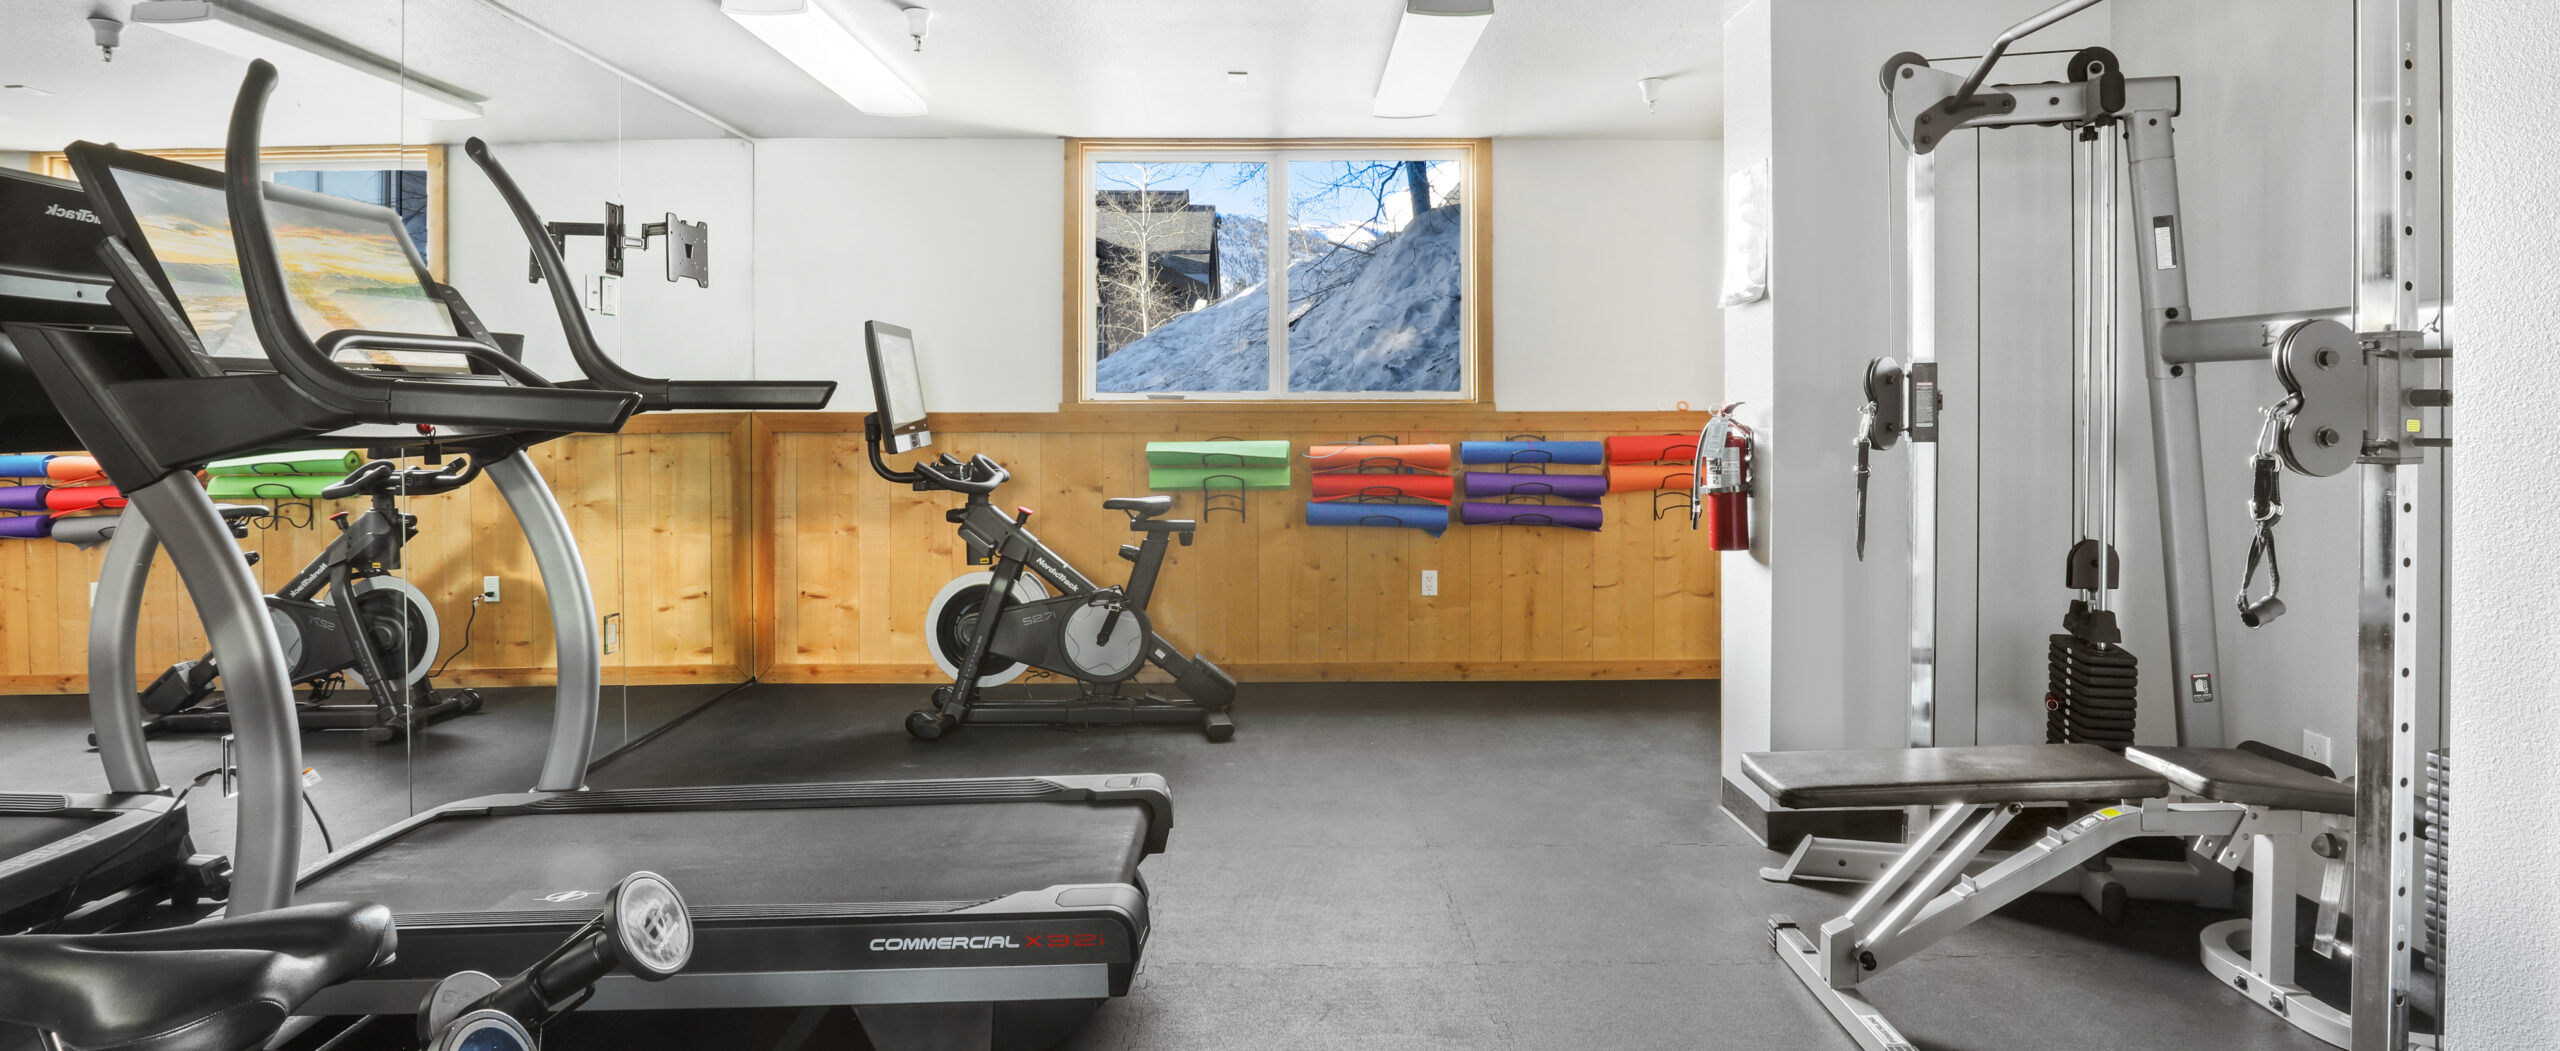 Photograph of a gym interior showcasing numerous exercise equipment.